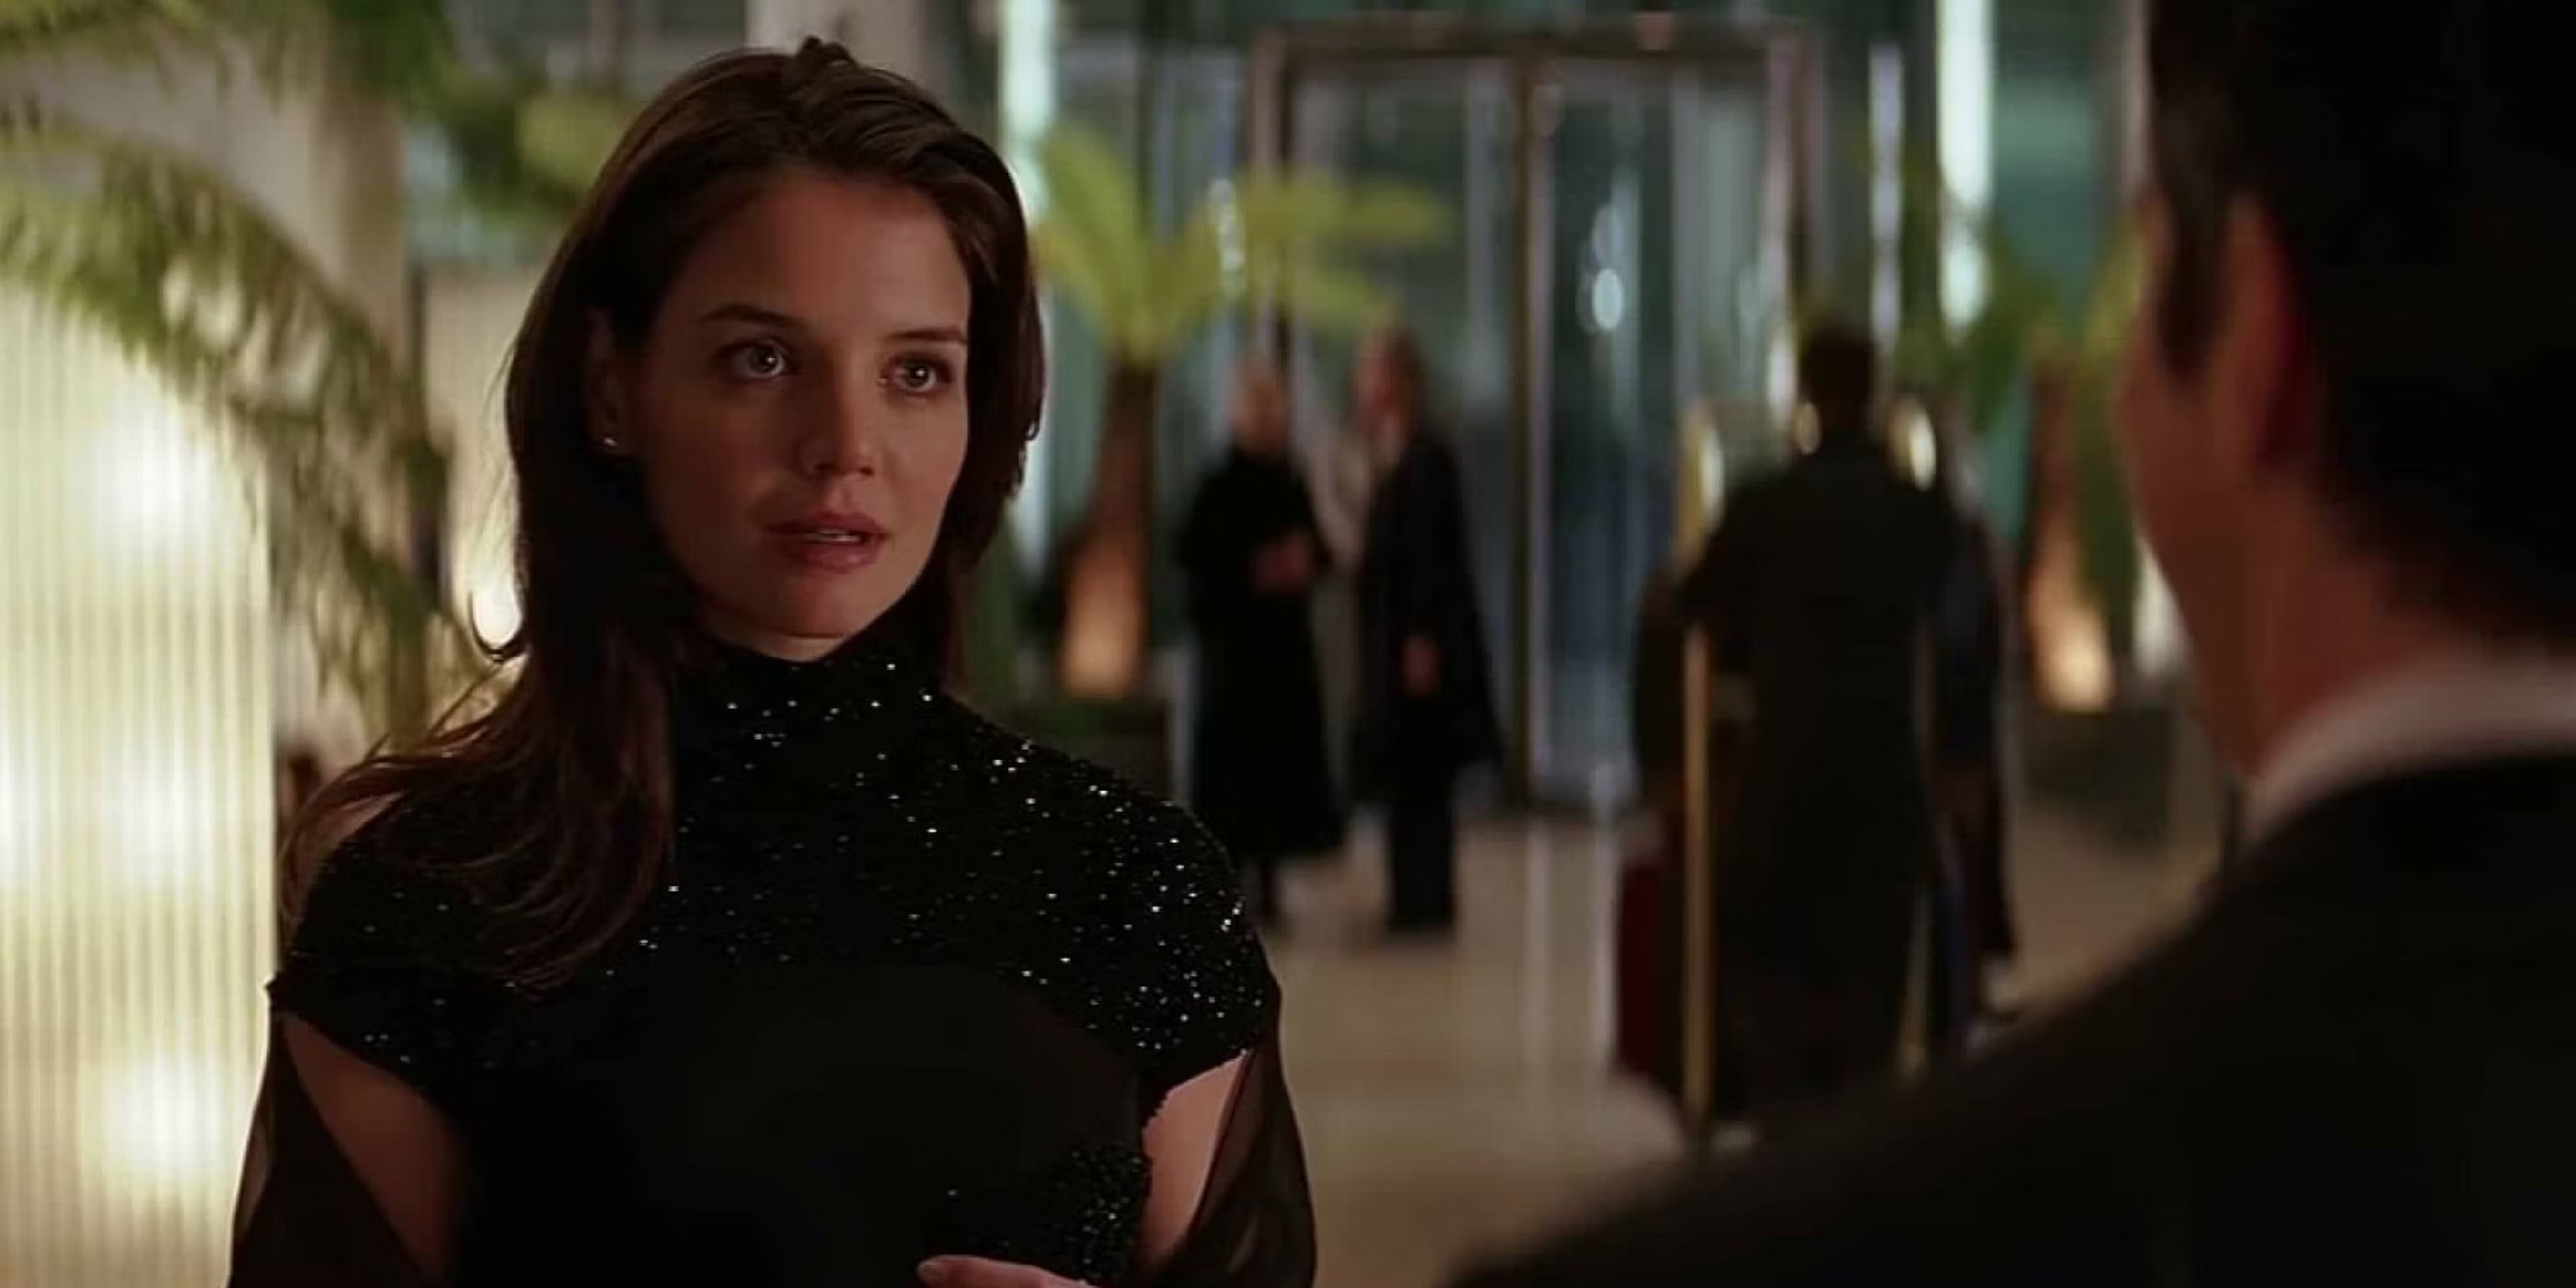 Rachel Dawes (Katie Holmes) stands in a sparkly dress at a fancy event as she confronts Bruce Wayne about his actions in 'Batman Begins' (2005).